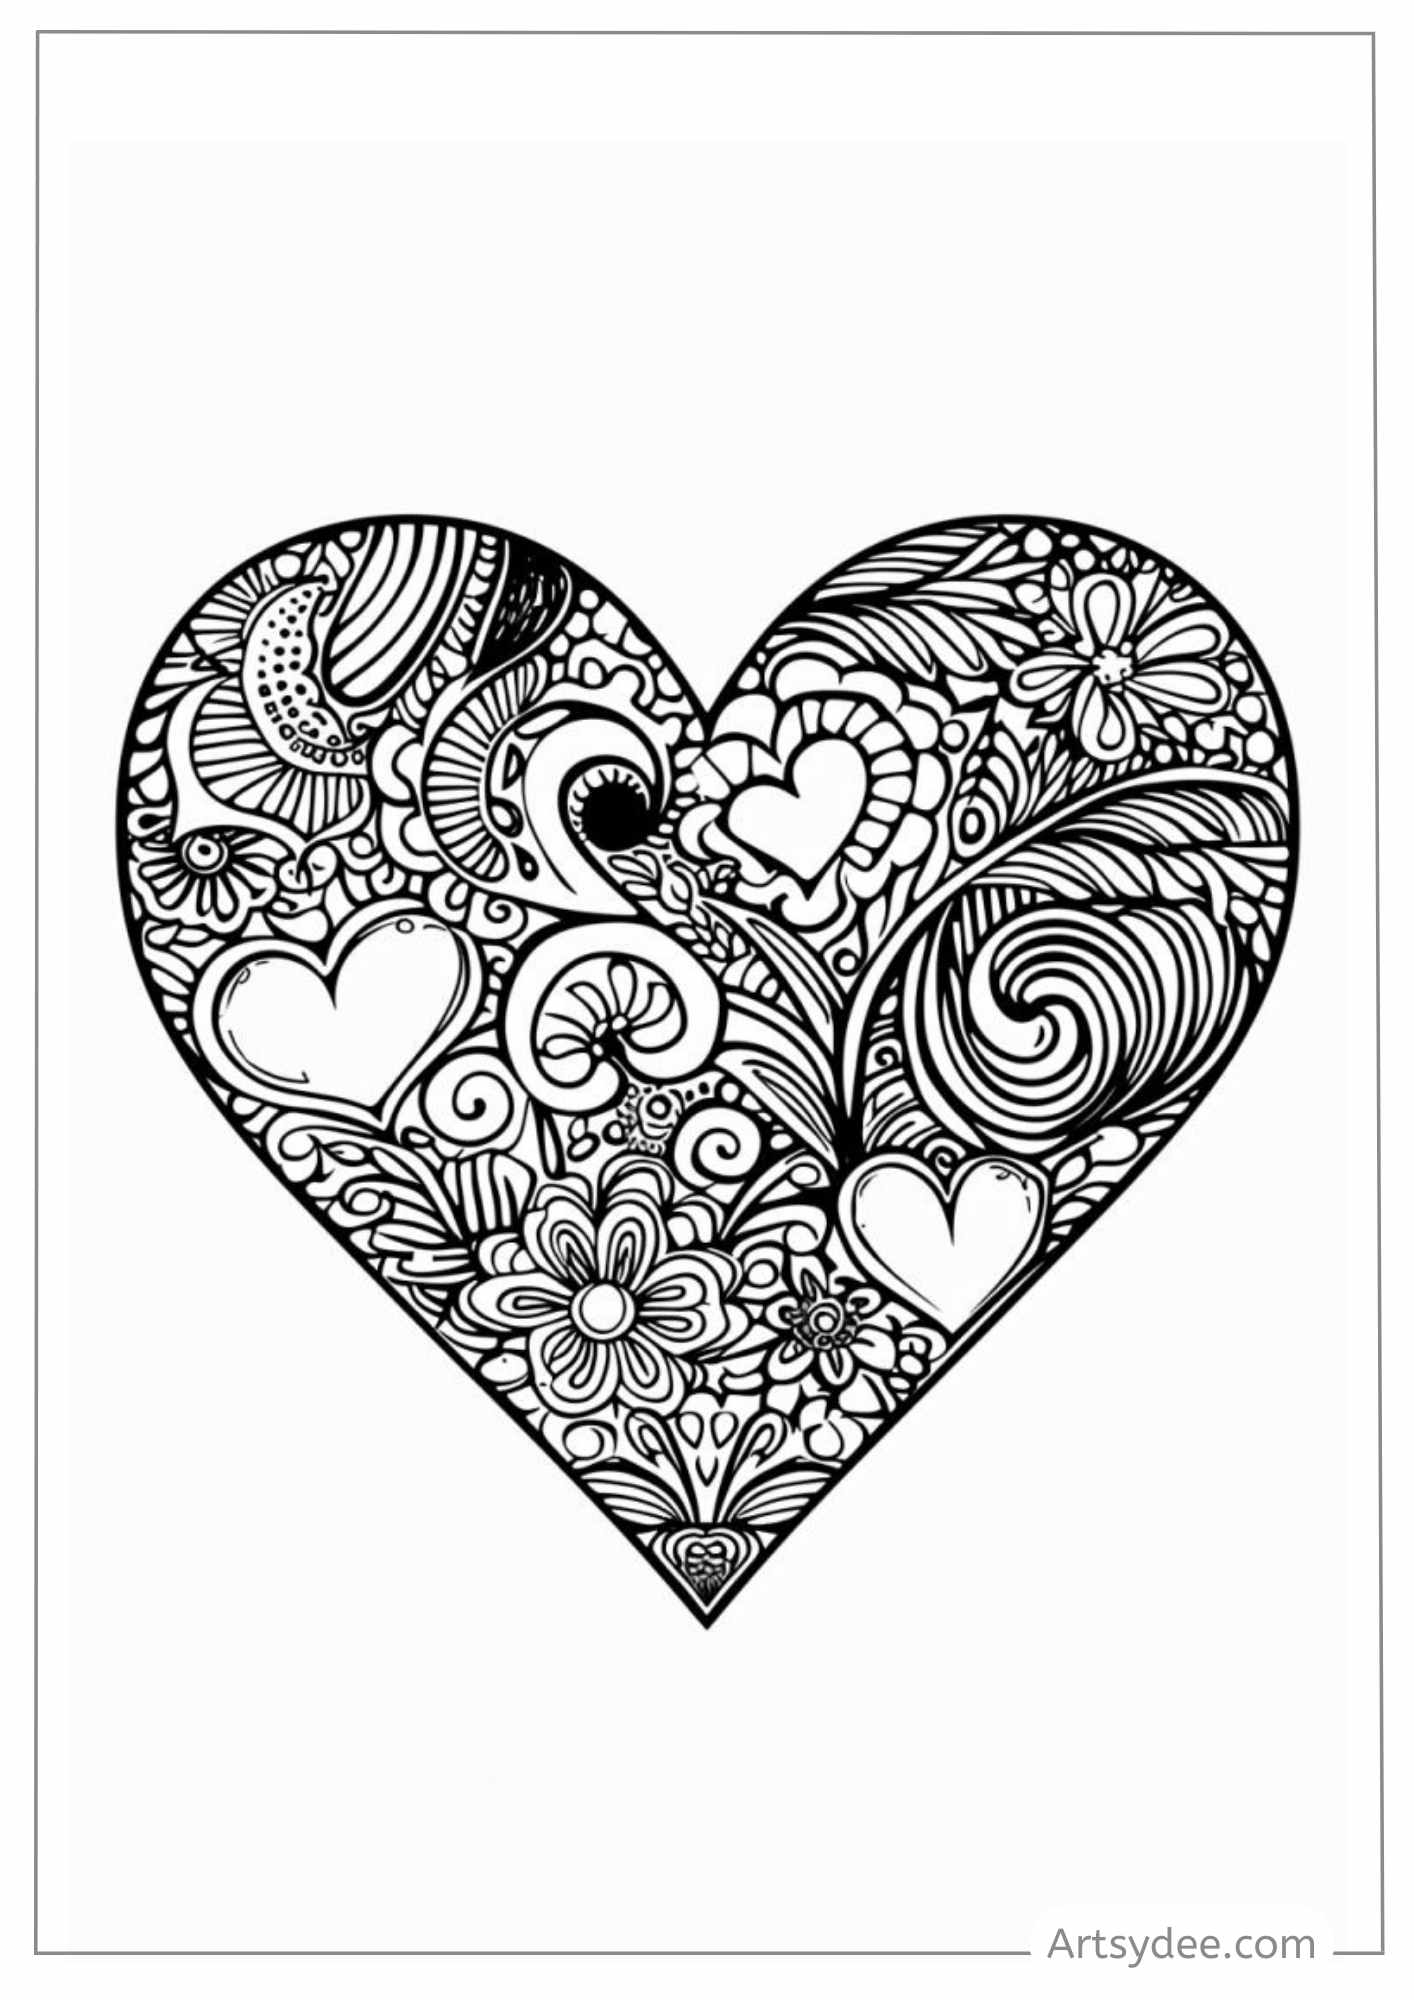 Embrace the Art of Love with 17 Free Printable Heart Coloring Pages ...